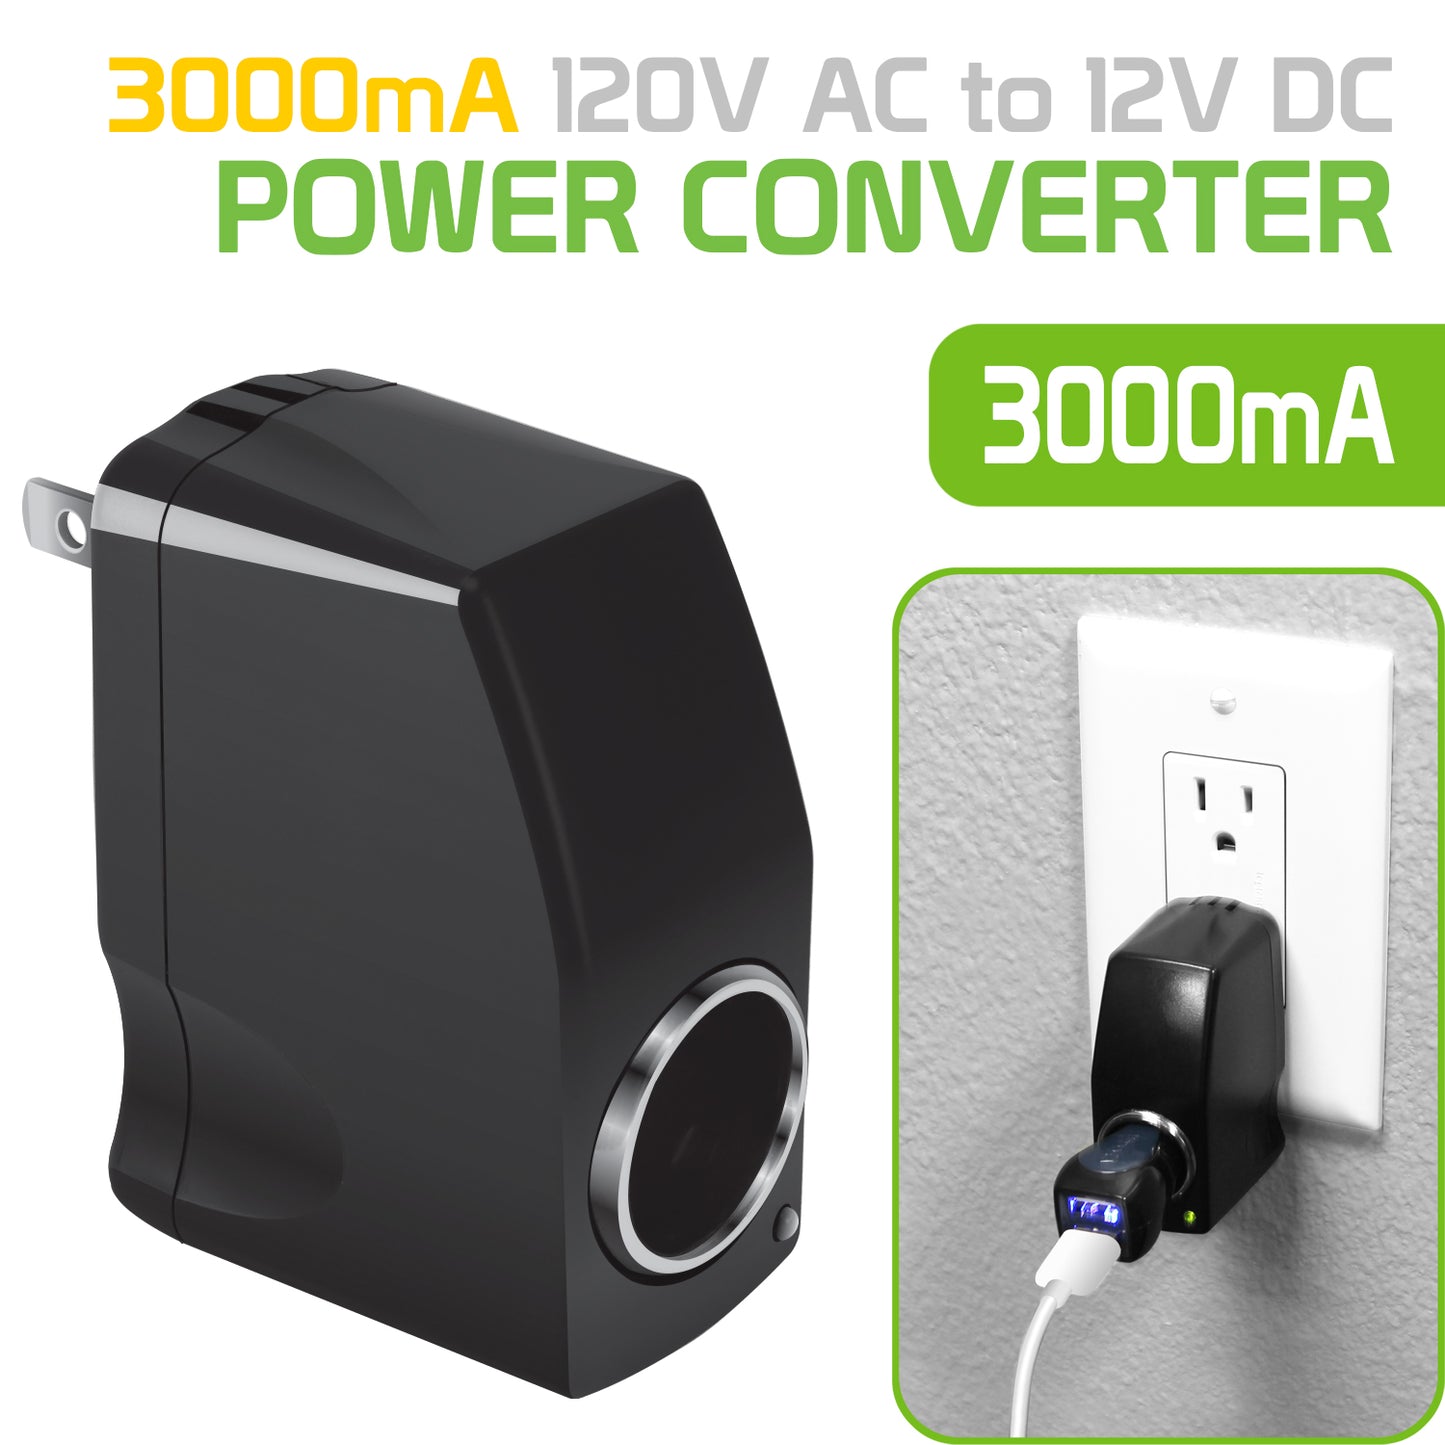 FM3000 - Compact Power Converter, 120V AC to 12 V DC (3000mA) Power Converter by Cellet